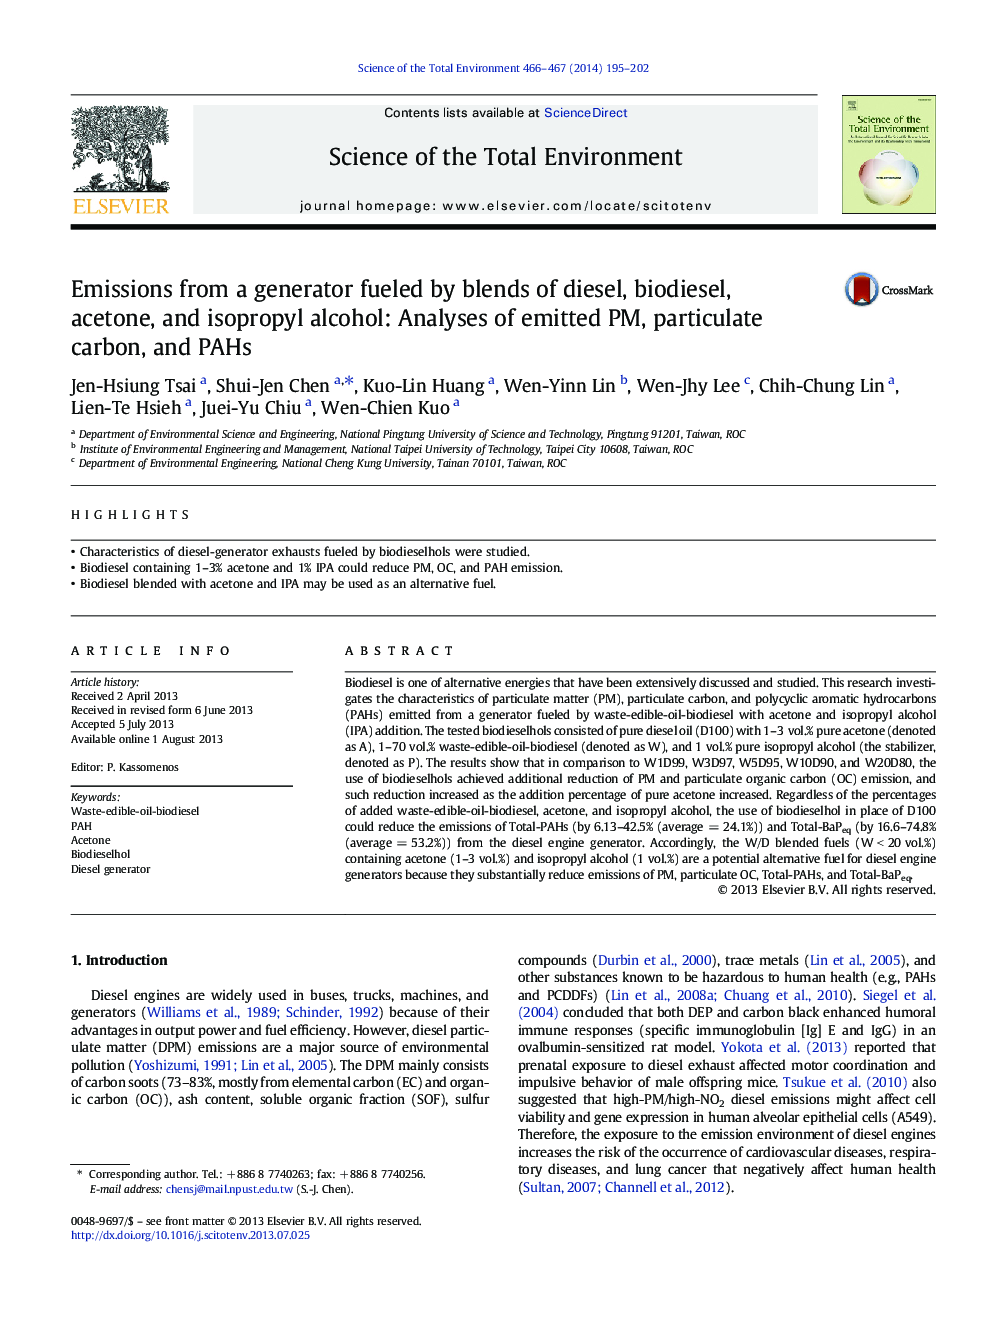 Emissions from a generator fueled by blends of diesel, biodiesel, acetone, and isopropyl alcohol: Analyses of emitted PM, particulate carbon, and PAHs